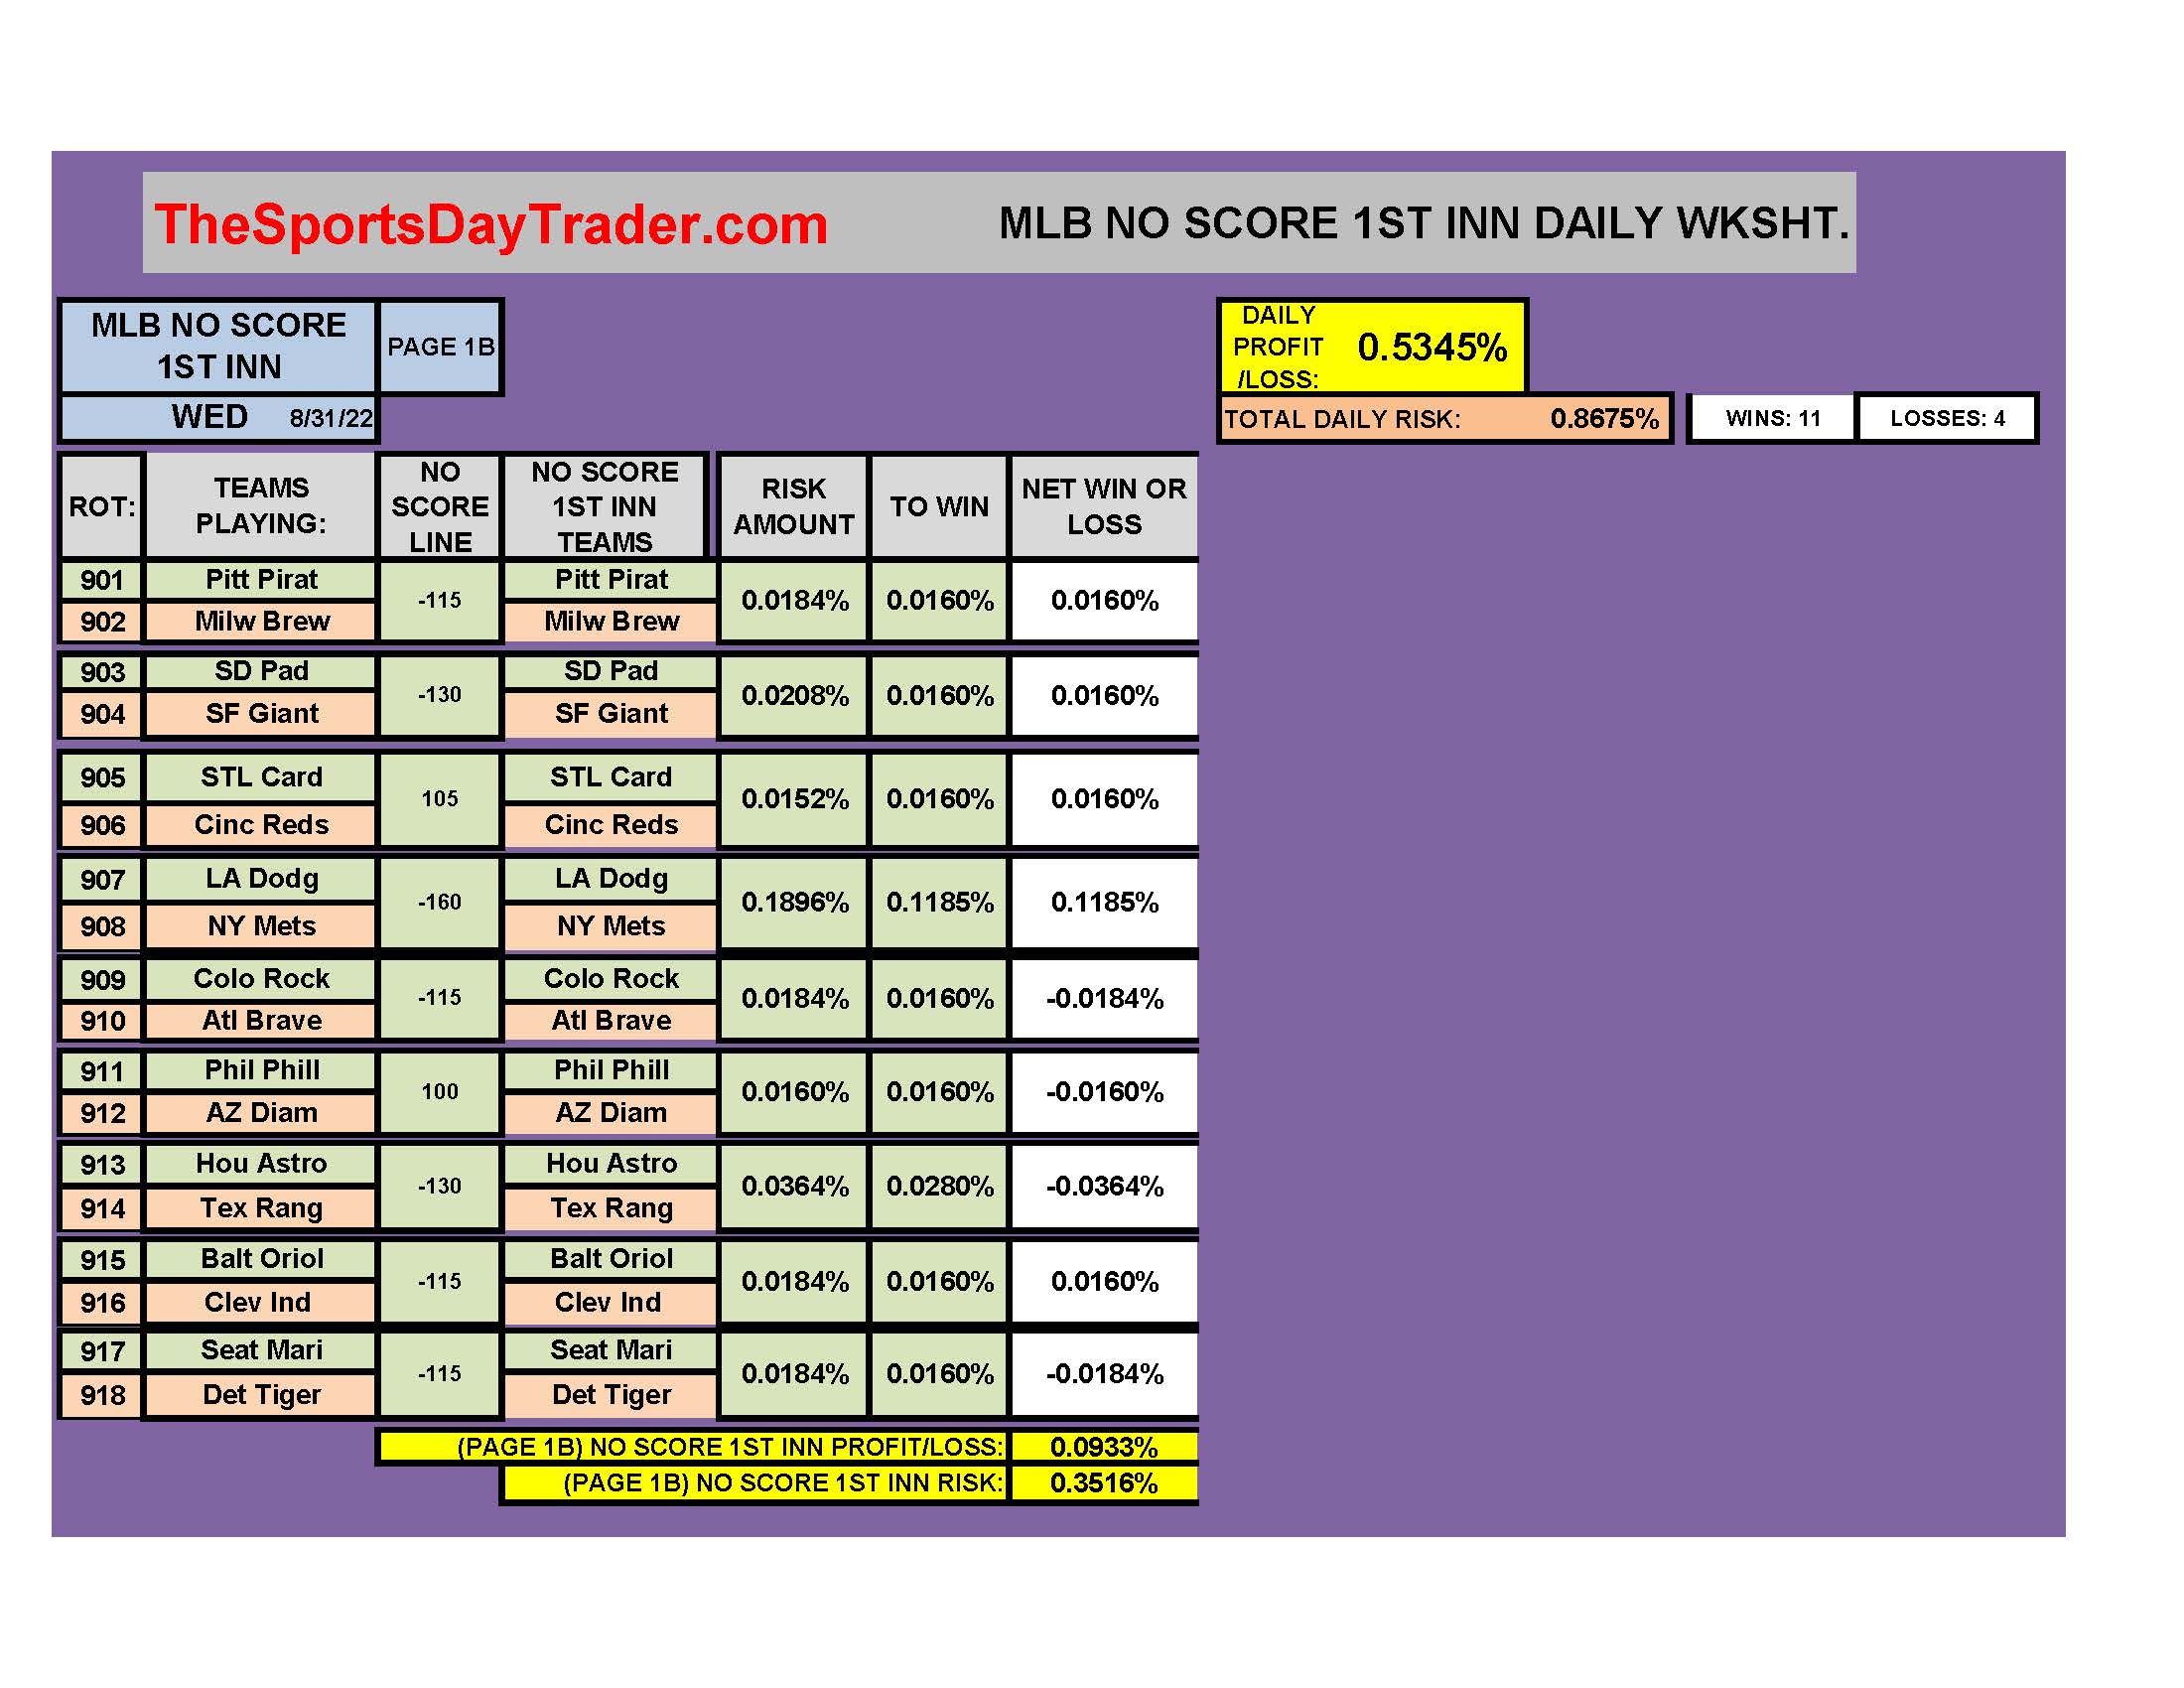 MLB 8/31/22 NO SCORE 1ST INNING DAILY RESULTS page 1